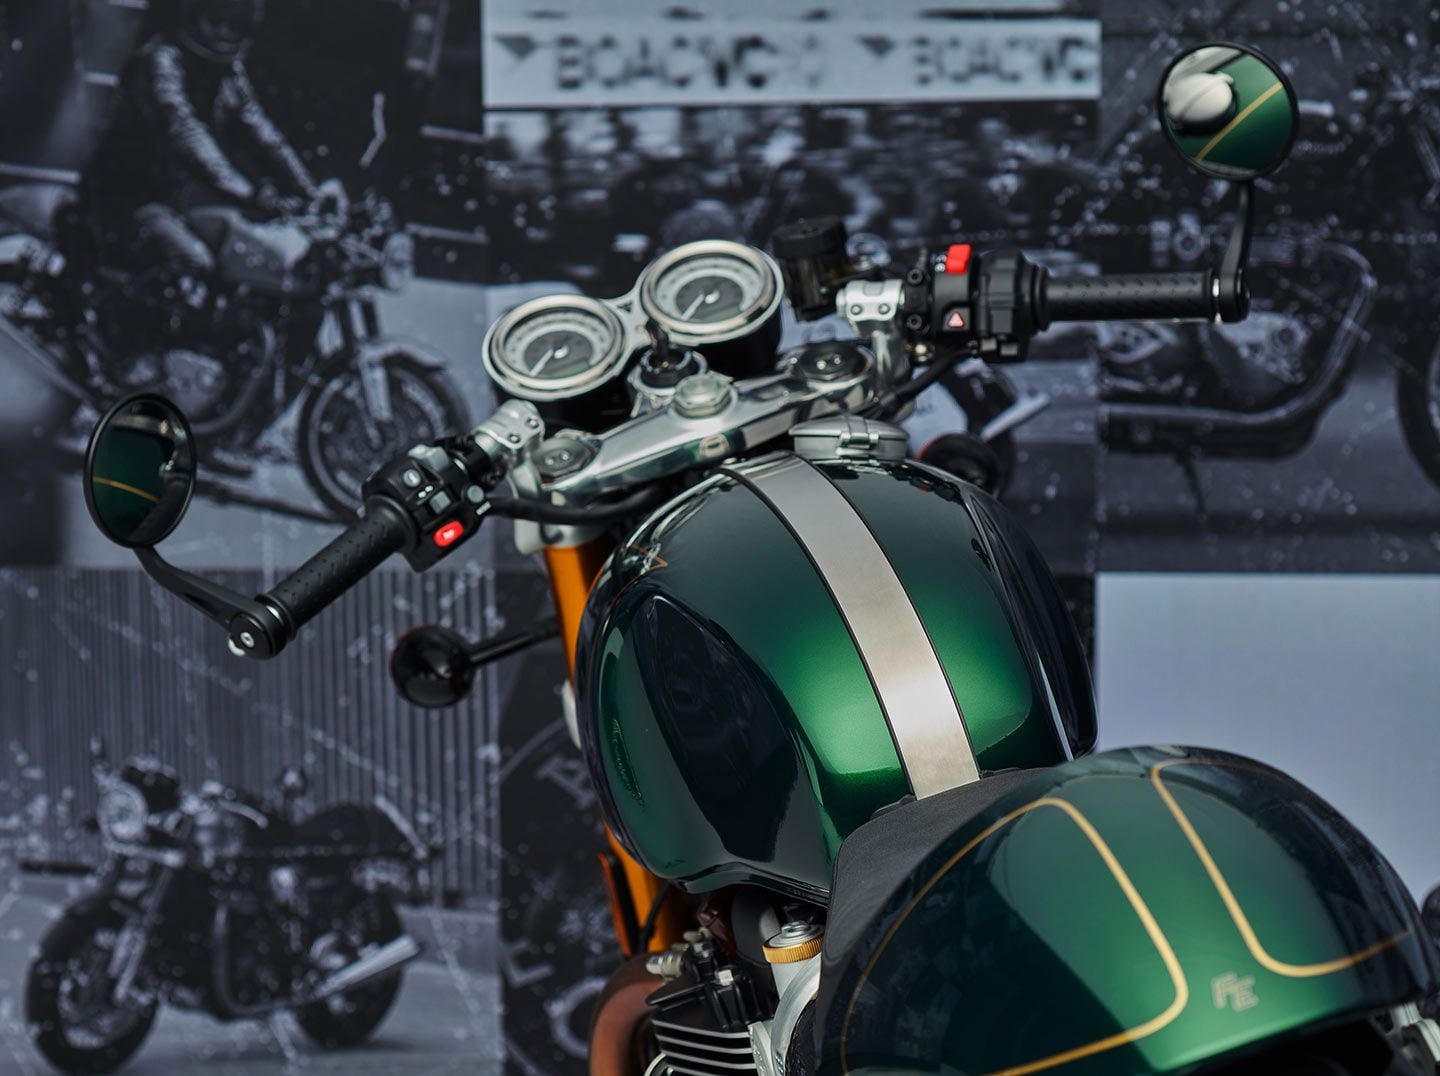 Rear view of the 2025 Thruxton FE shows details like the stainless tank strap, dual gauges, and rear cowling.